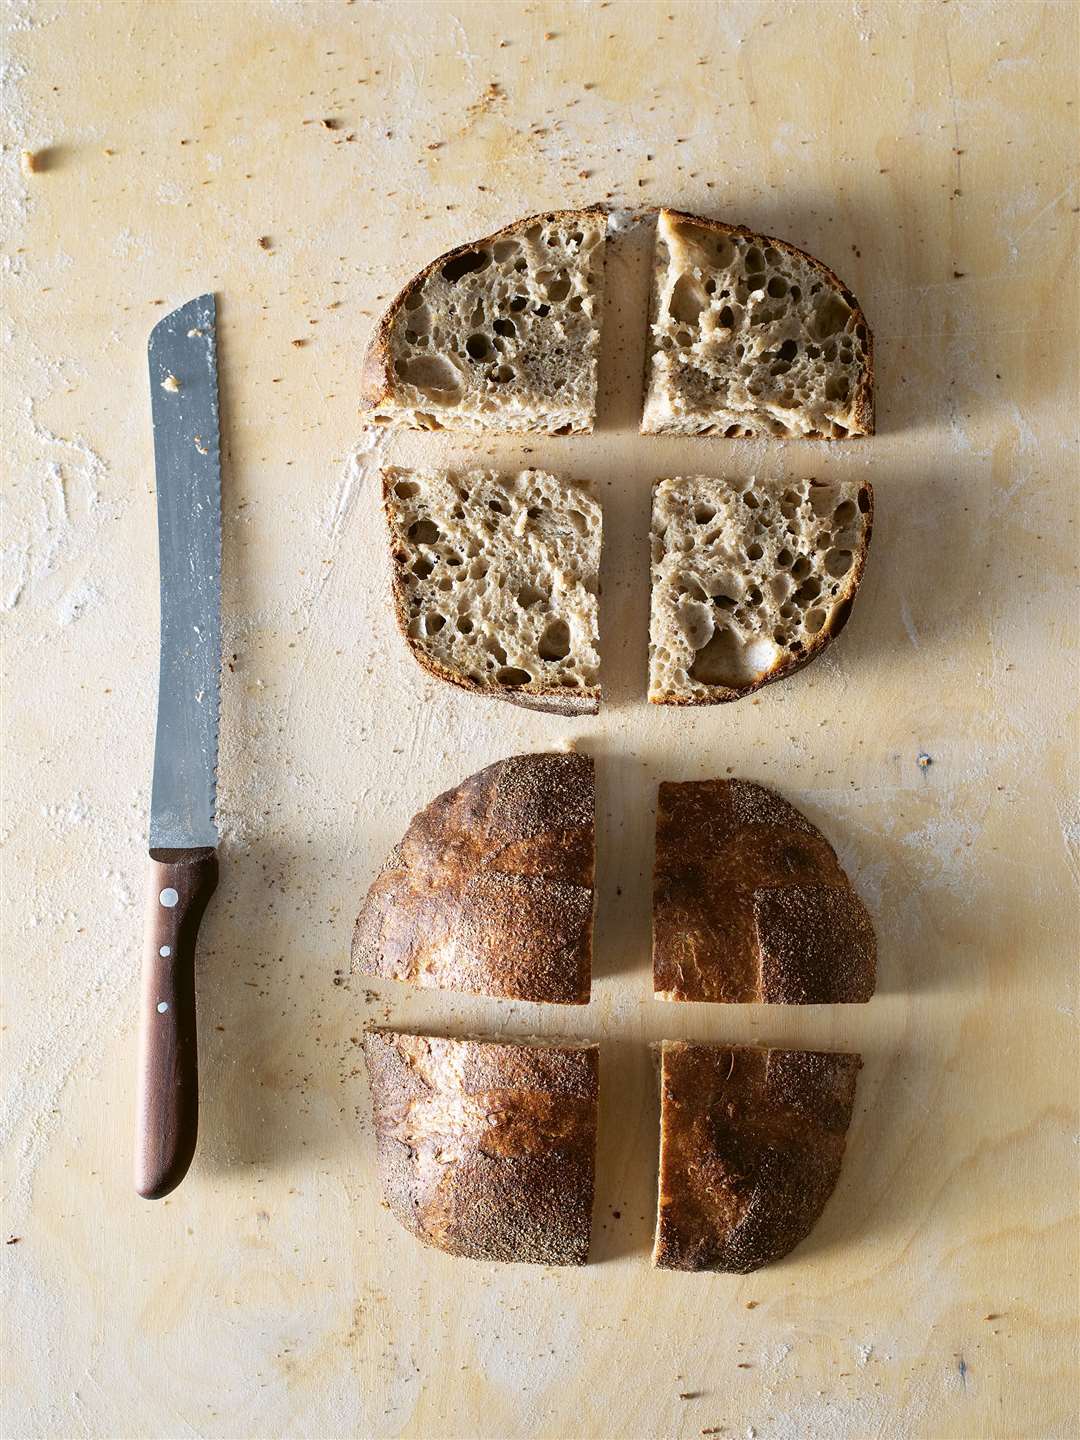 Pave rustique from Super Sourdough by James Morton. Picture: Andy Sewell/PA